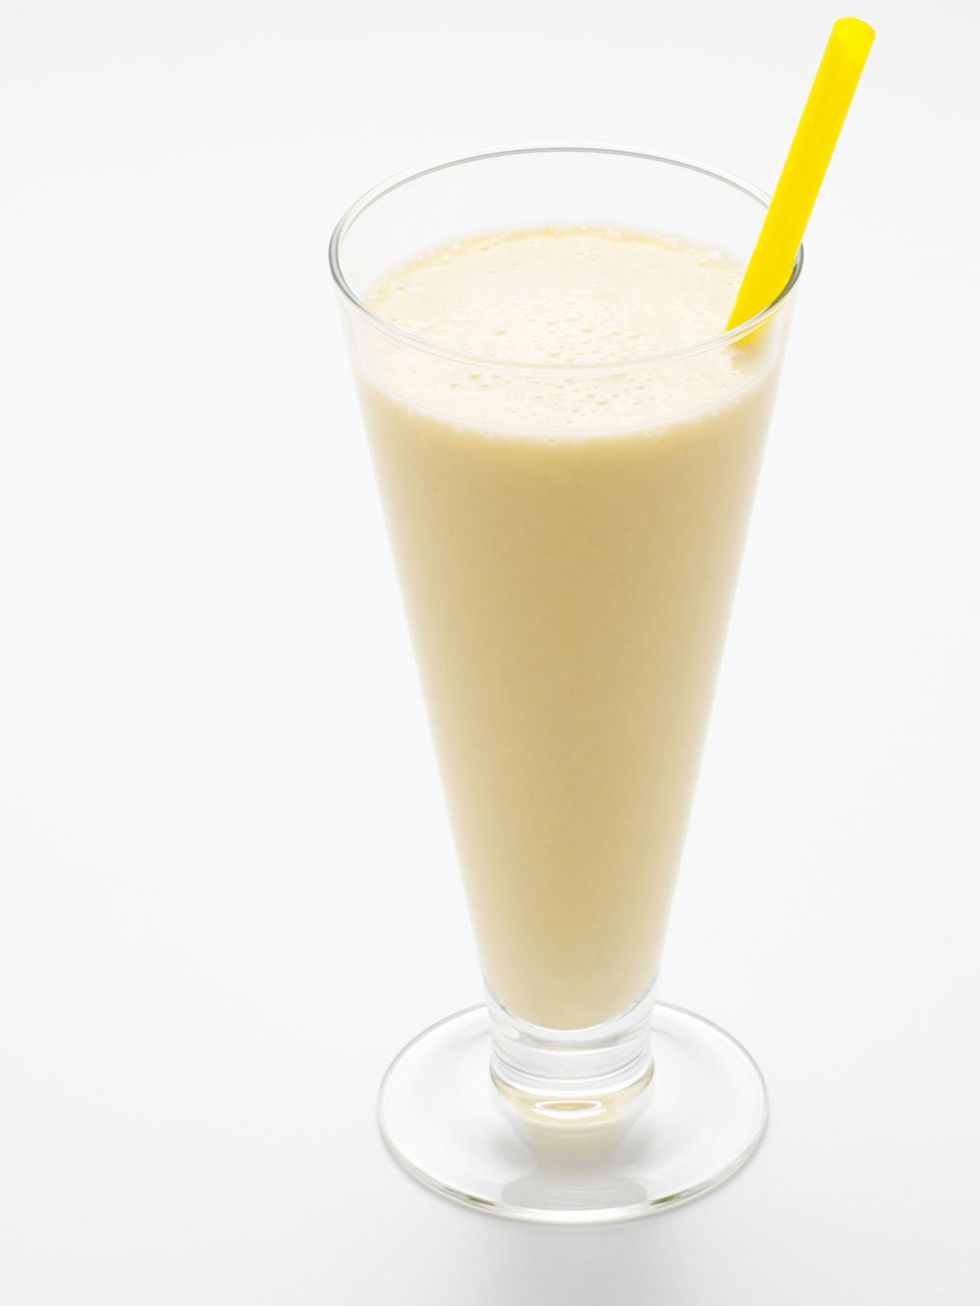 <p><em>Breakfast Smoothie</em></p><p><strong>Method:</strong>Pour 125ml soya, oat or almond milk into a blender with 1/2 peeled banana, 1 tablespoon almonds, 1 tablespoon oats and blend until smooth. Add another 125ml milk and 1/2 teaspoon of runny honey 